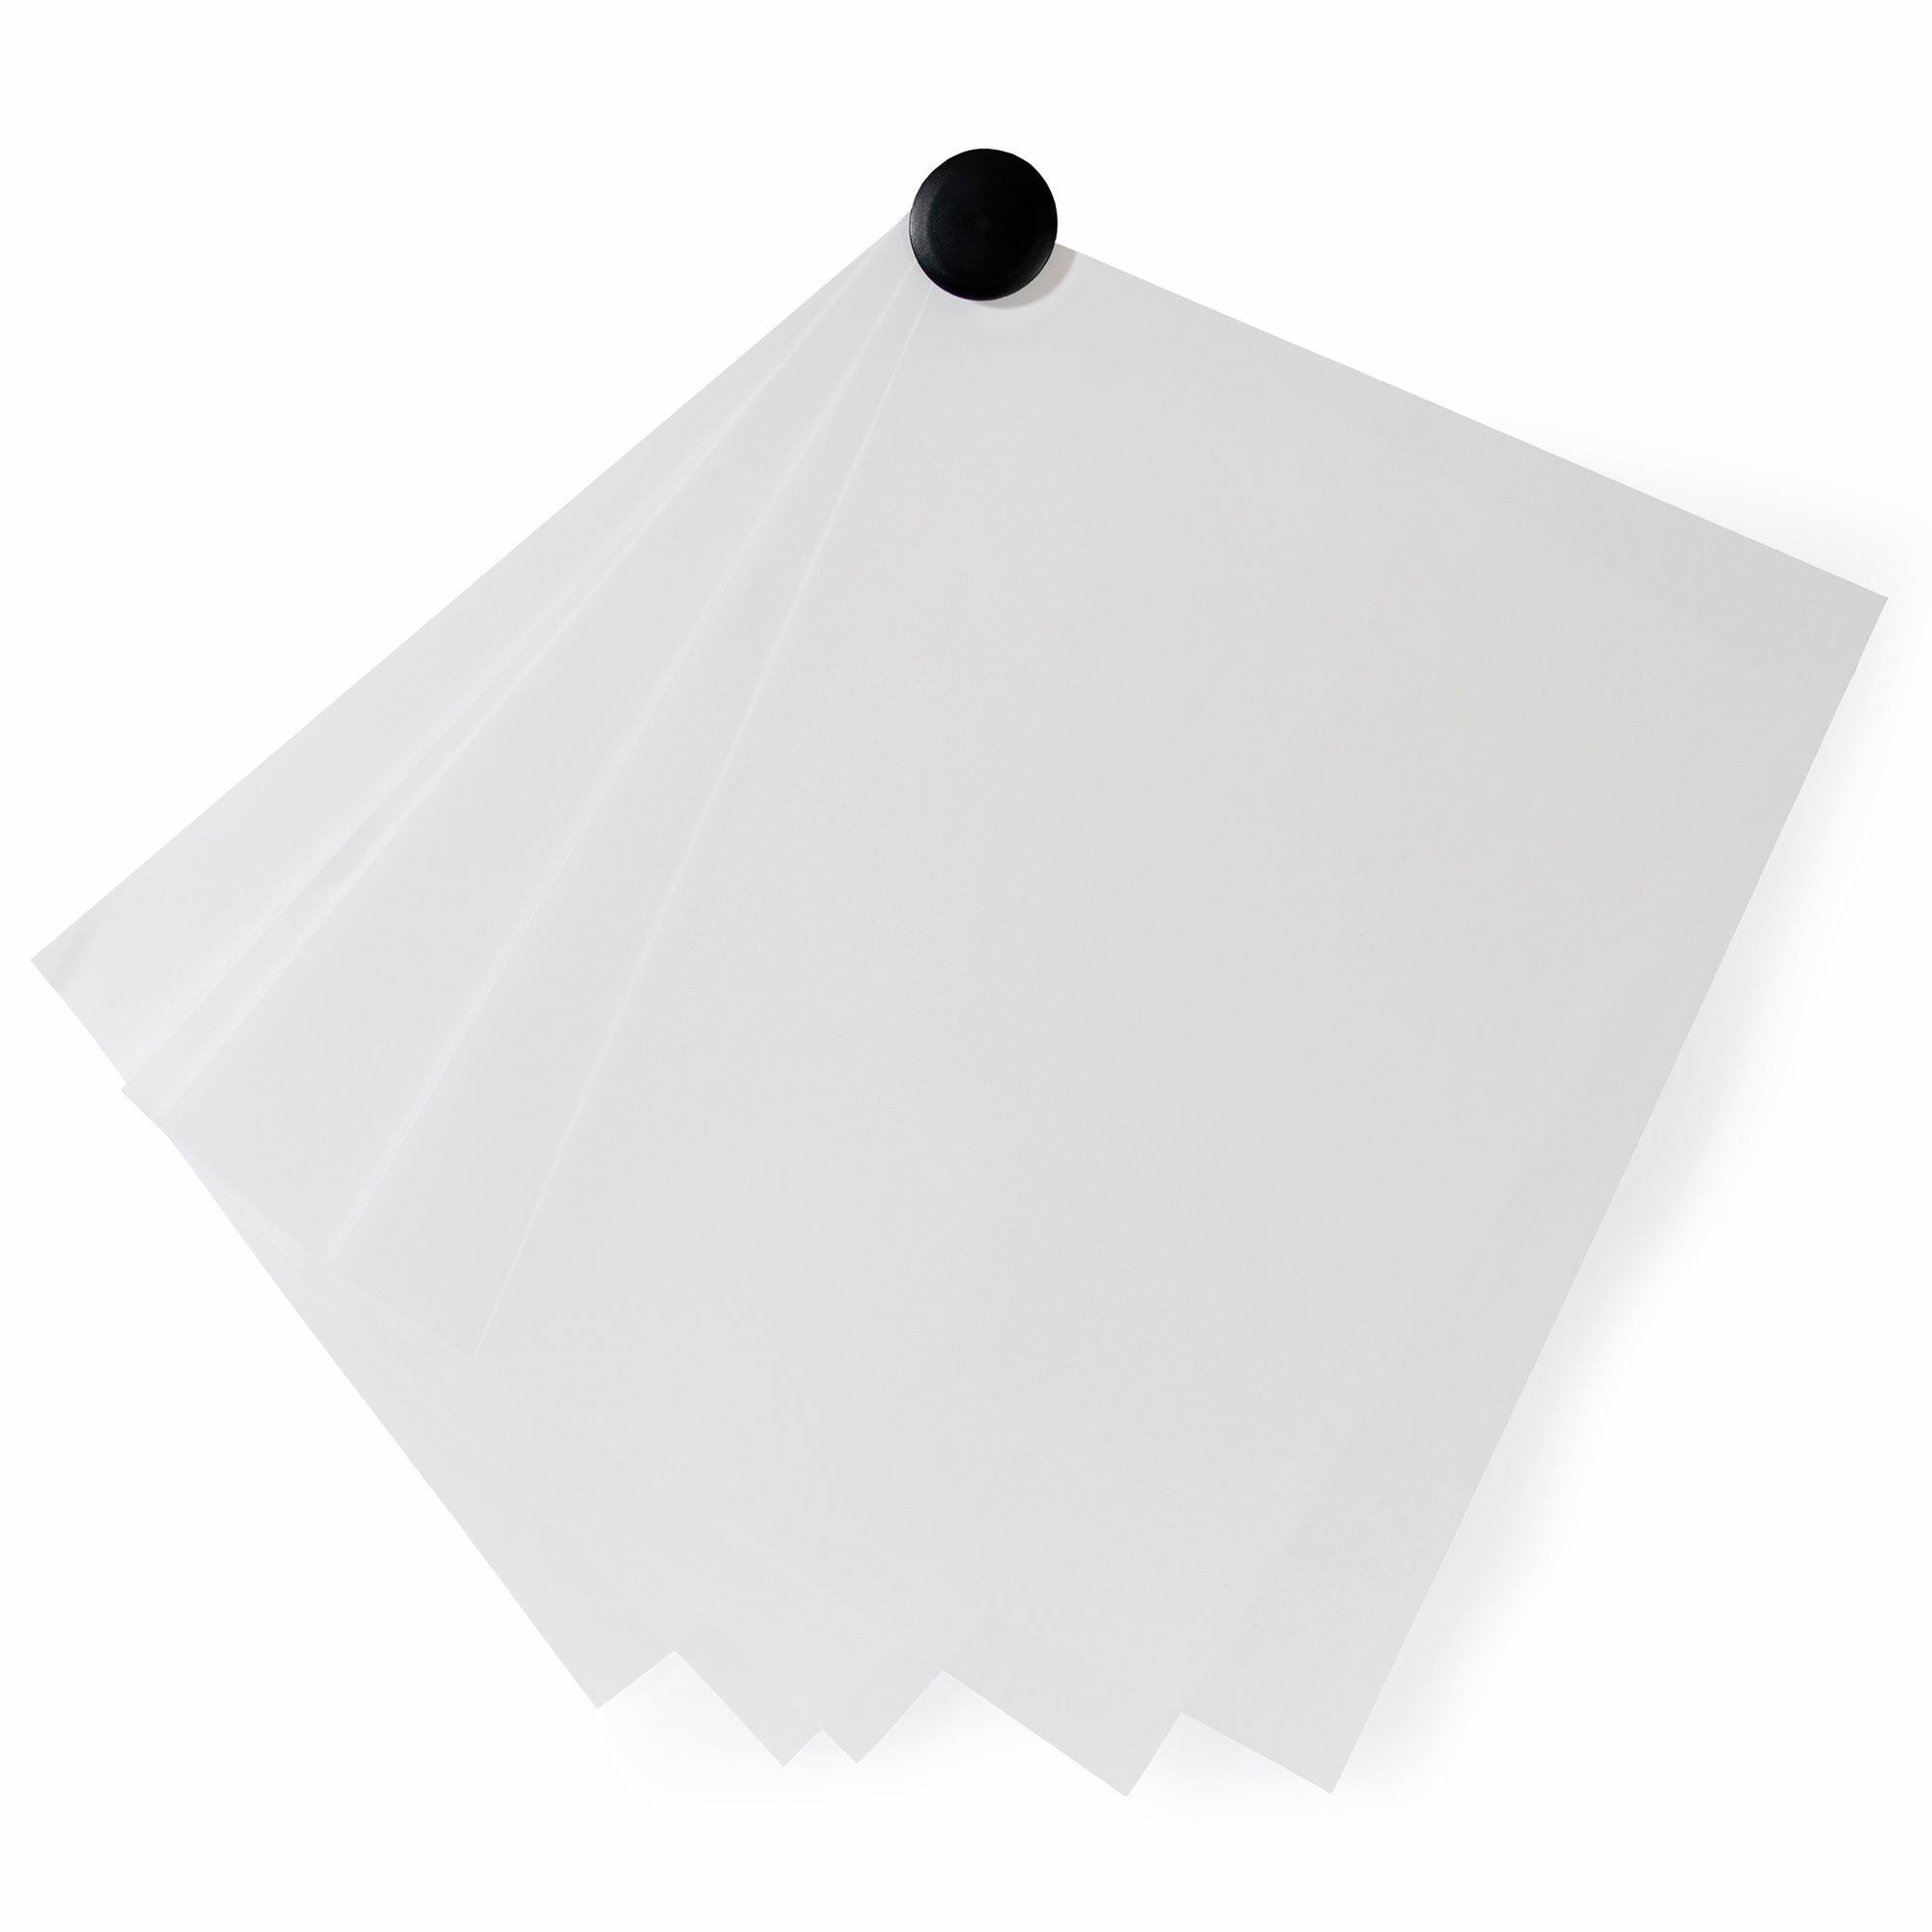 High Powered Magnets for Glass Dry-Erase Boards, Set of 5 Black. 